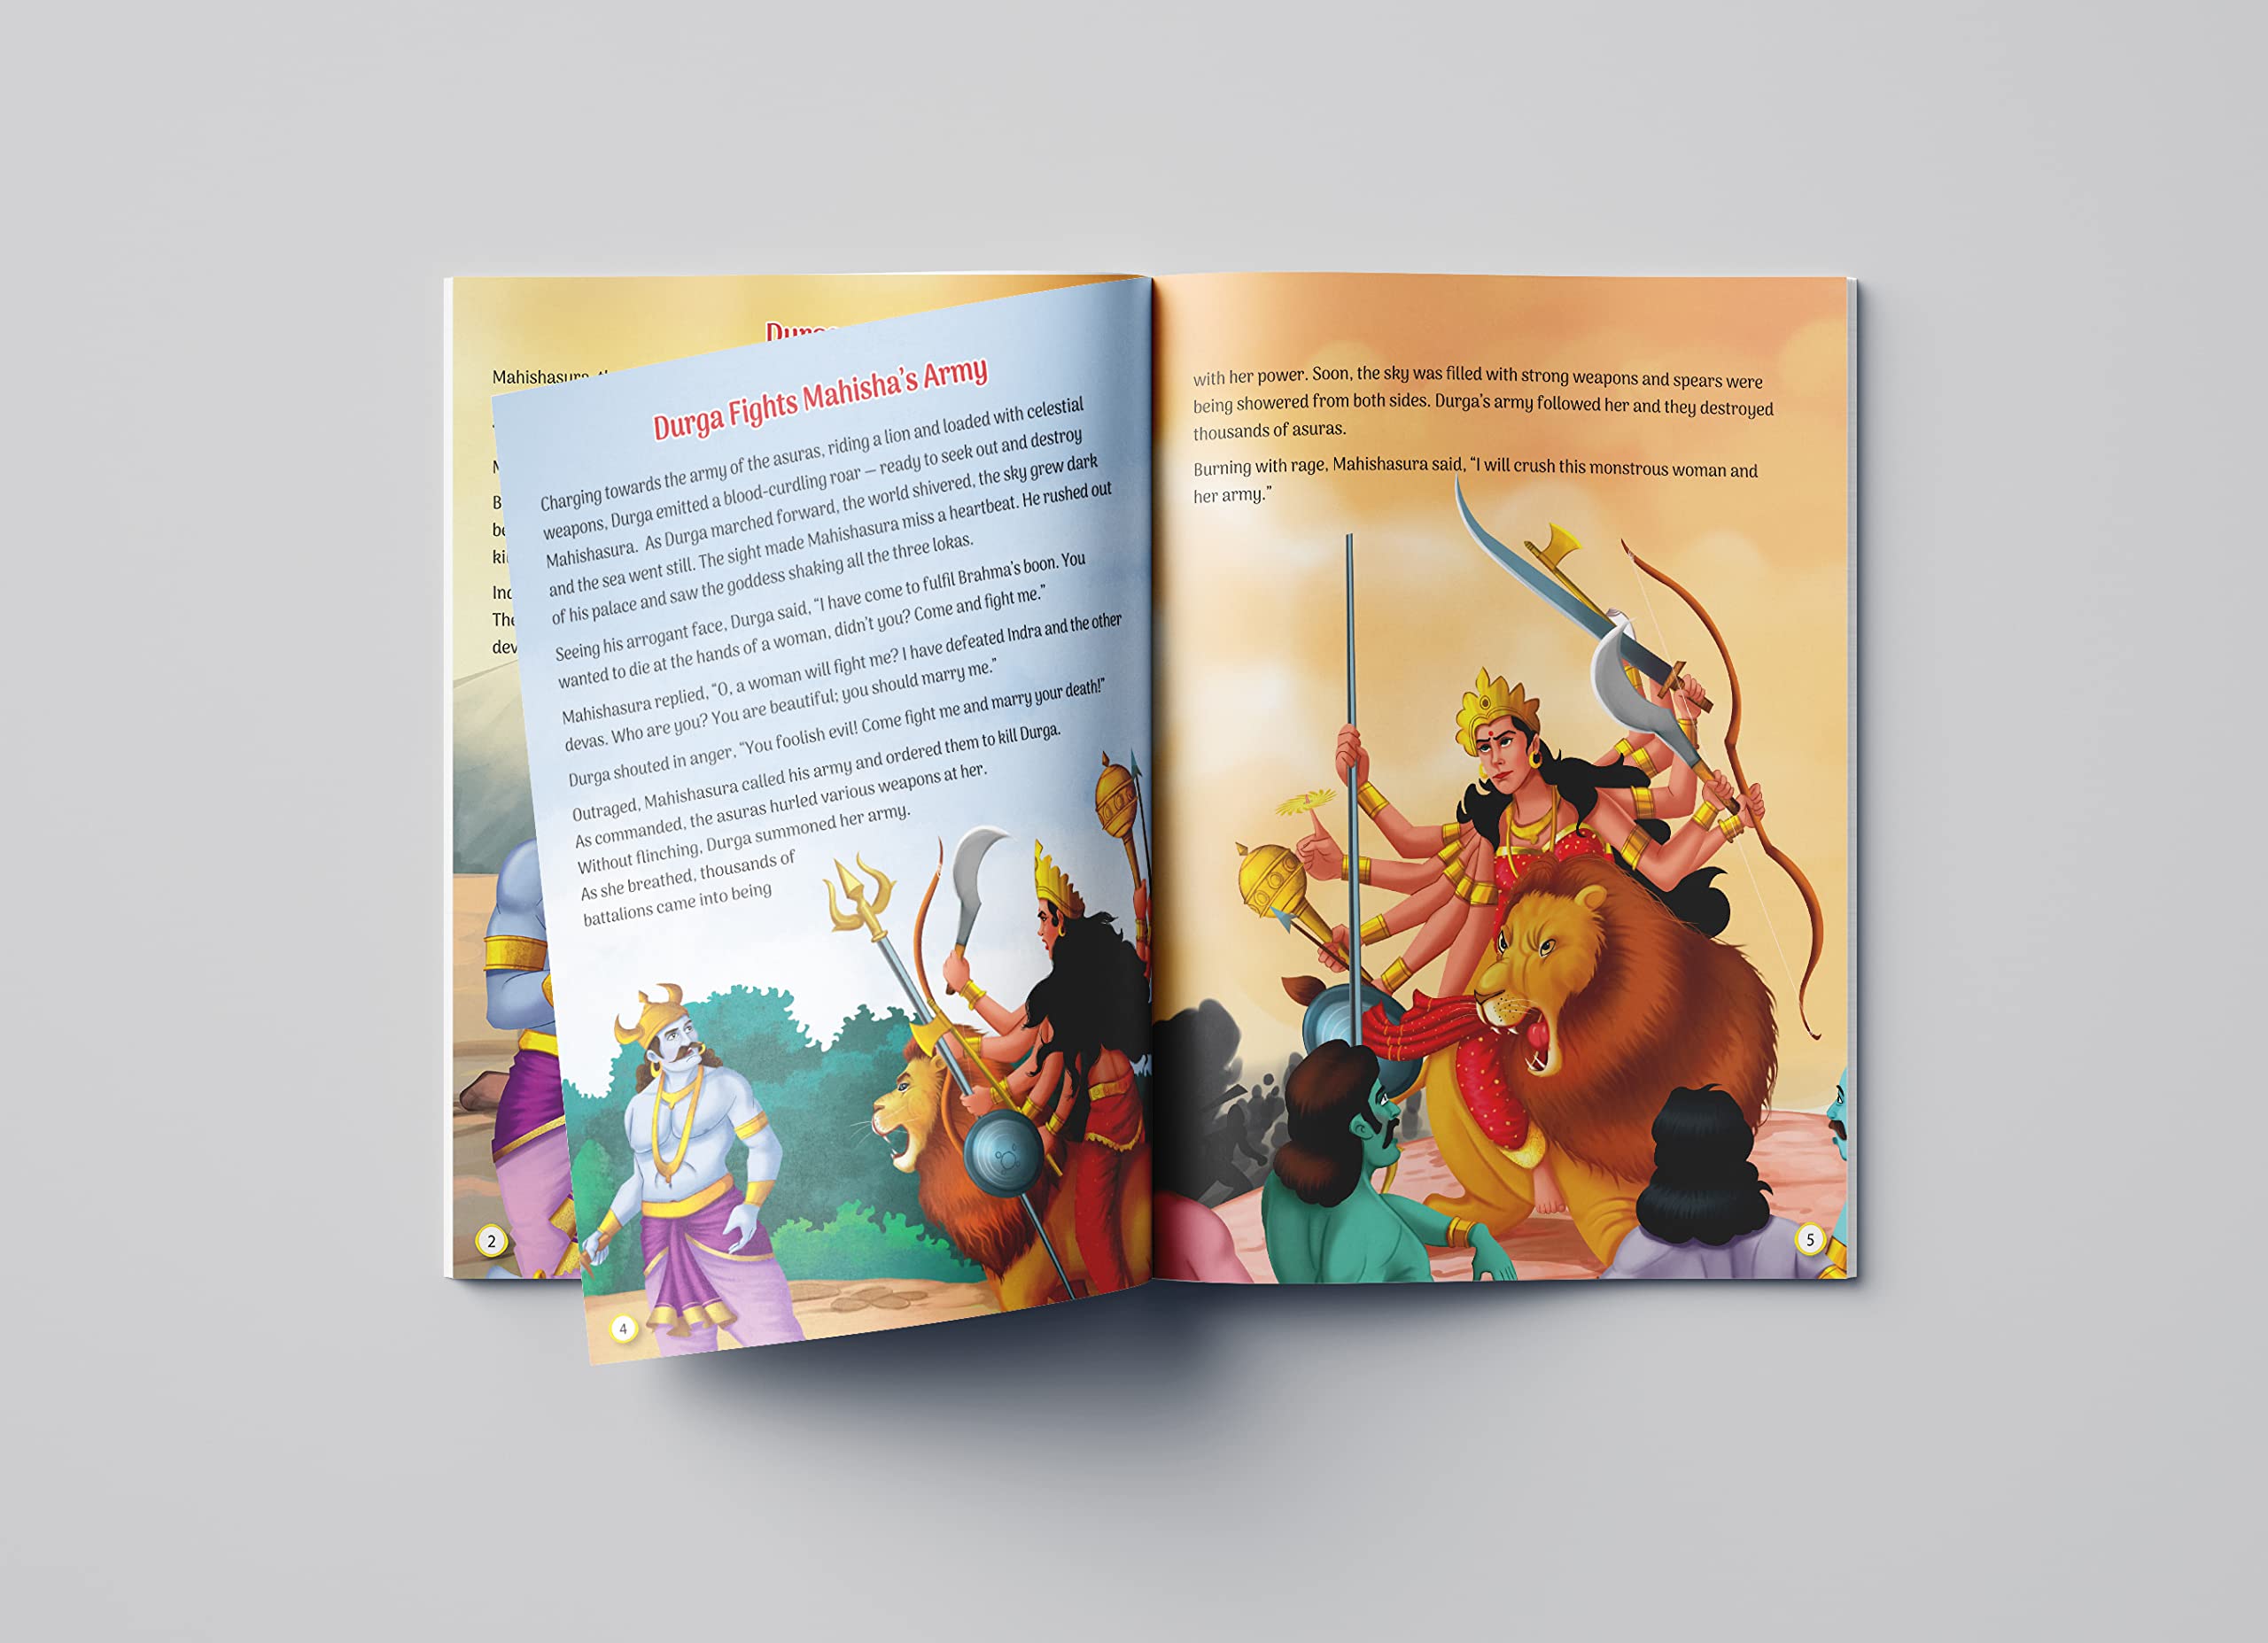 Tales from Durga (Indian Mythology for Children)